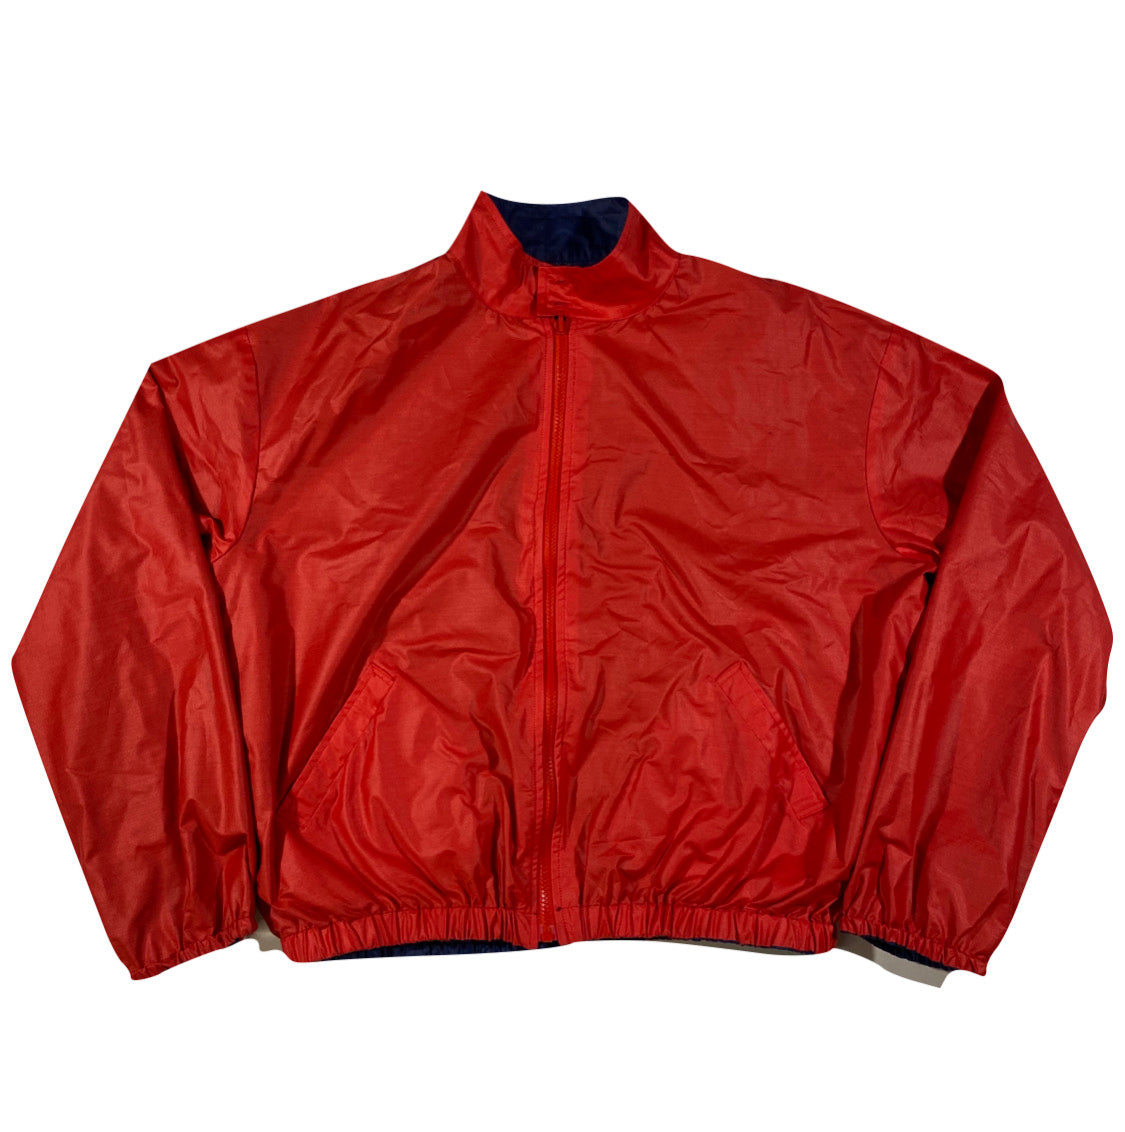 80s Saks fith ave reversible jacket L/XL